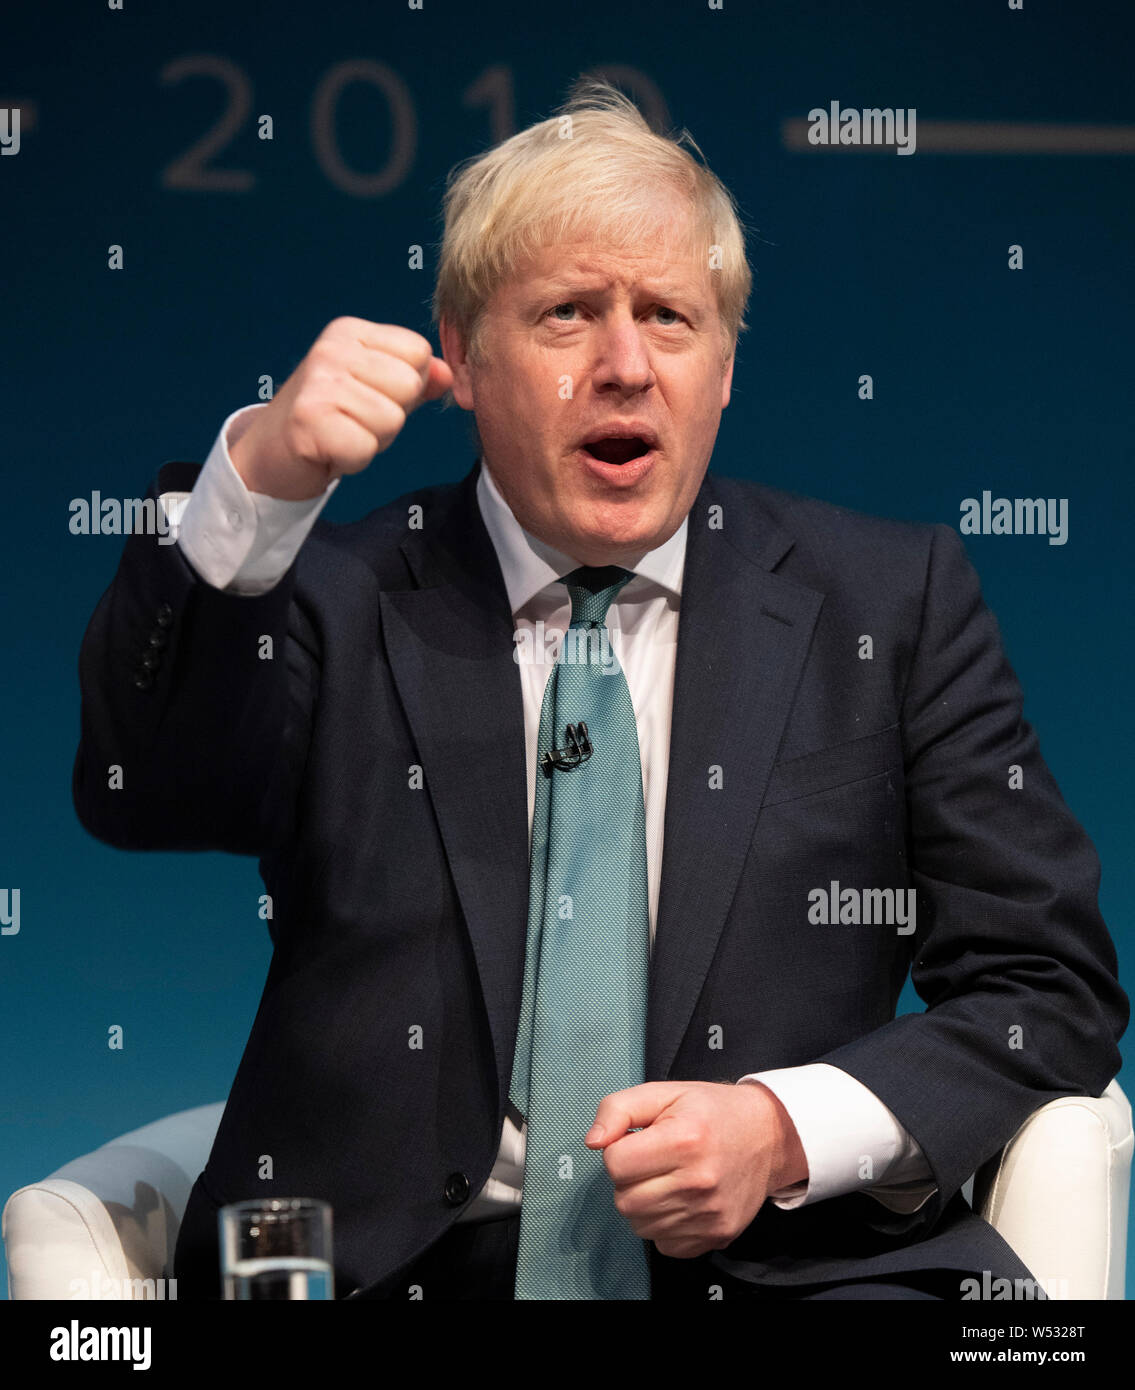 Conservative leadership candidate Boris Johnson at the Darlington leadership hustings on July 05, 2019 in Guisborough, England. Boris Johnson and Jeremy Hunt are the final two MPs left in the contest to replace Theresa May as leader of the Conservative Party. Stock Photo